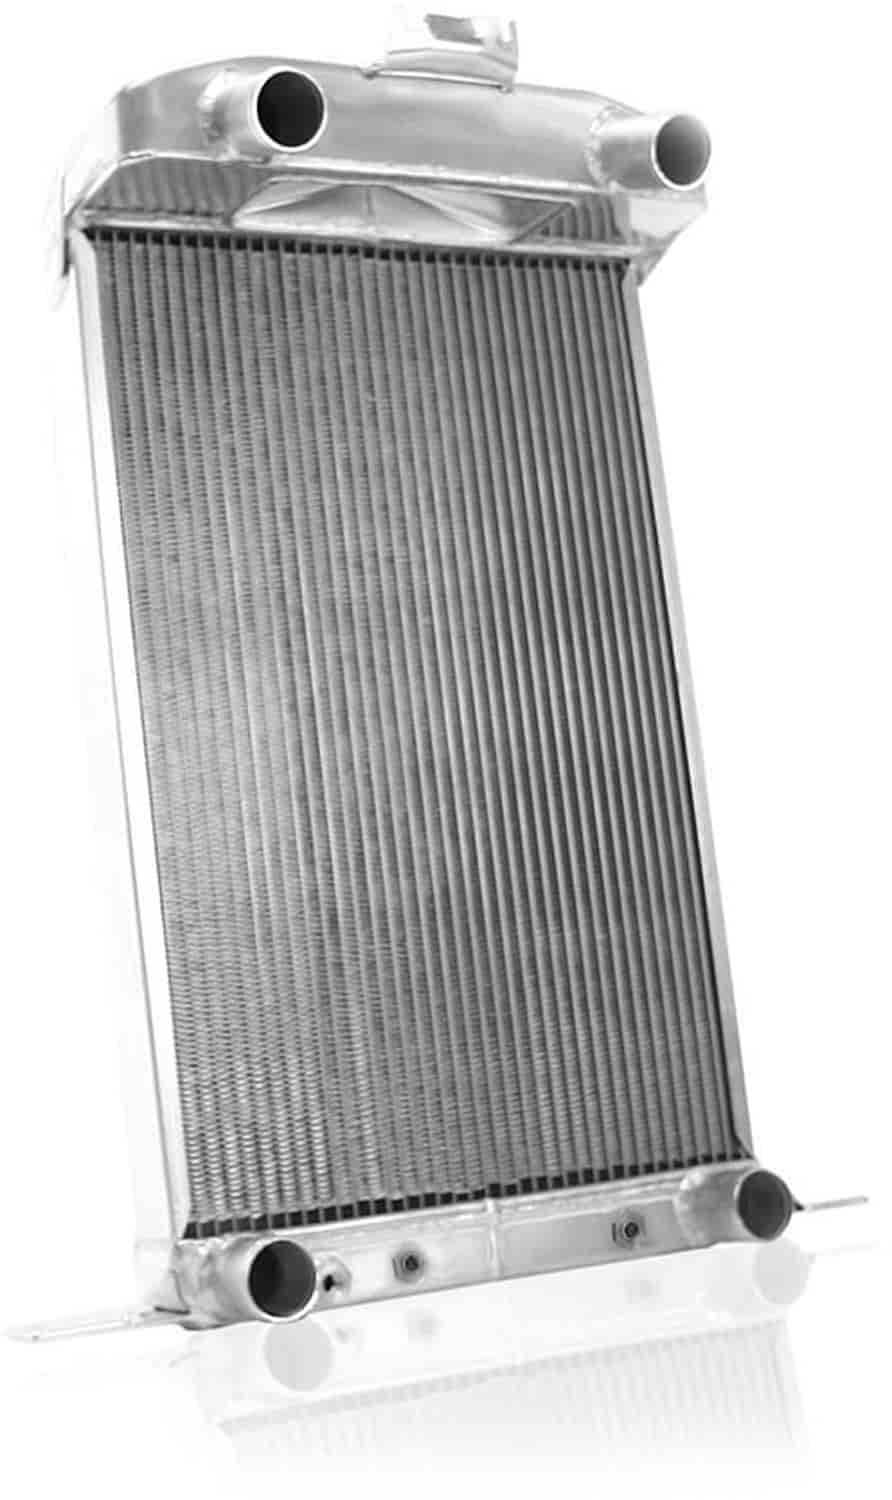 ExactFit Radiator for 1937-1938 Ford with Early Ford